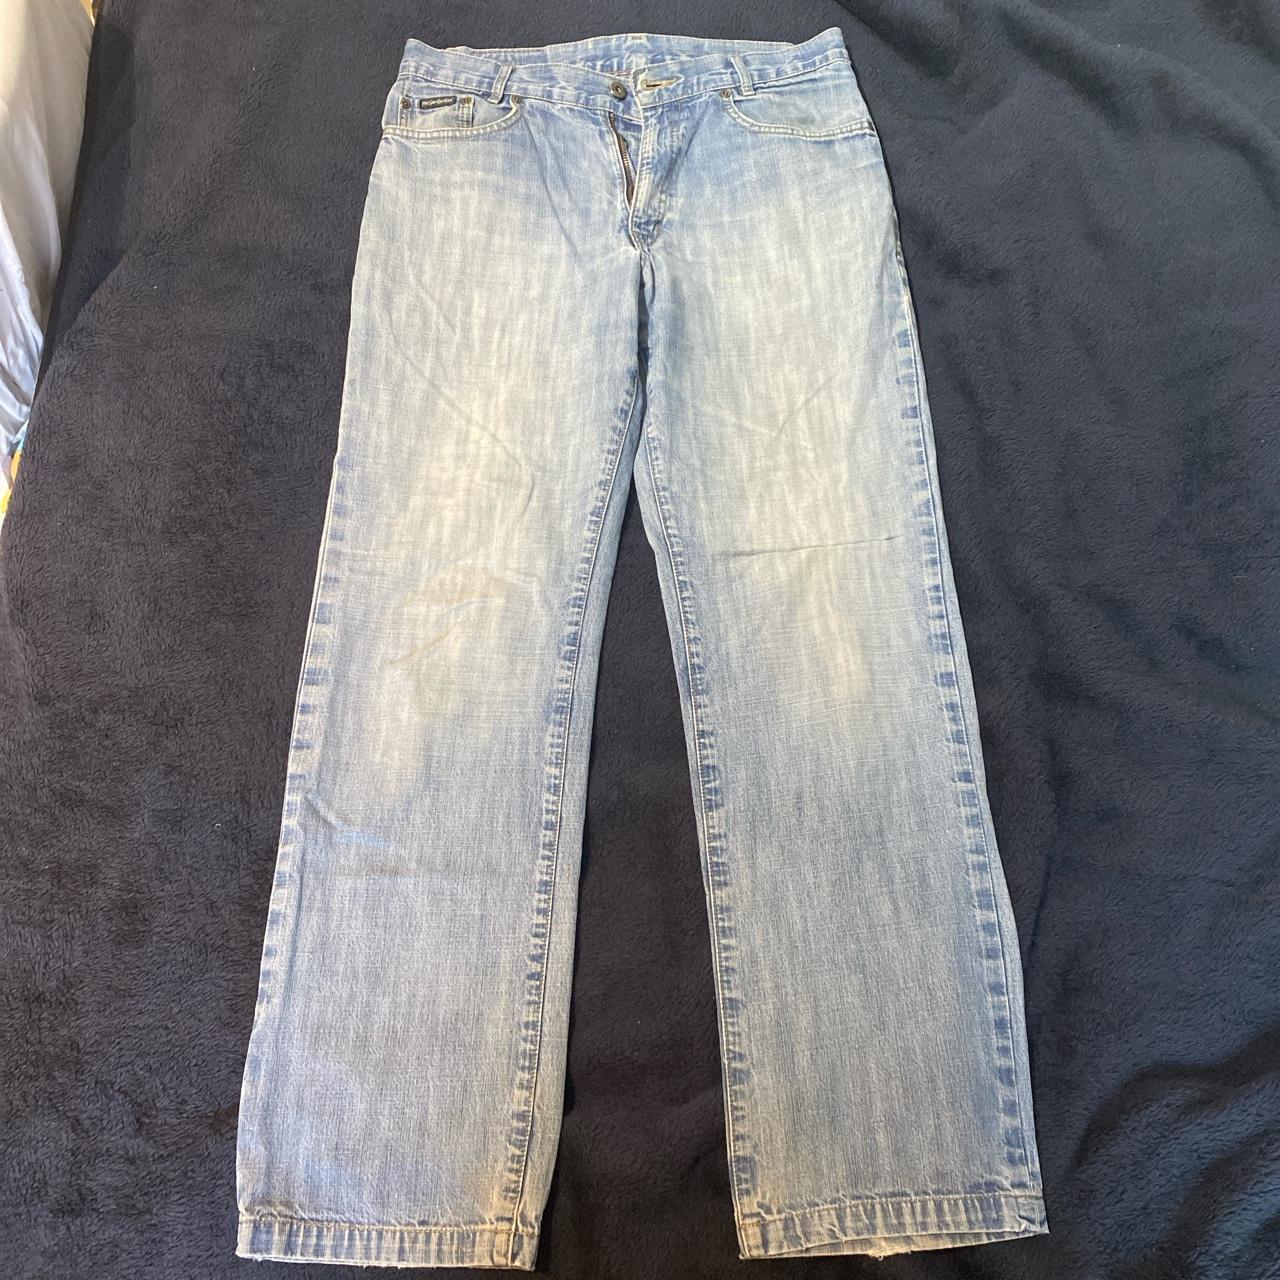 YSL jeans 32/32 Good condition Knee repaired but not... - Depop